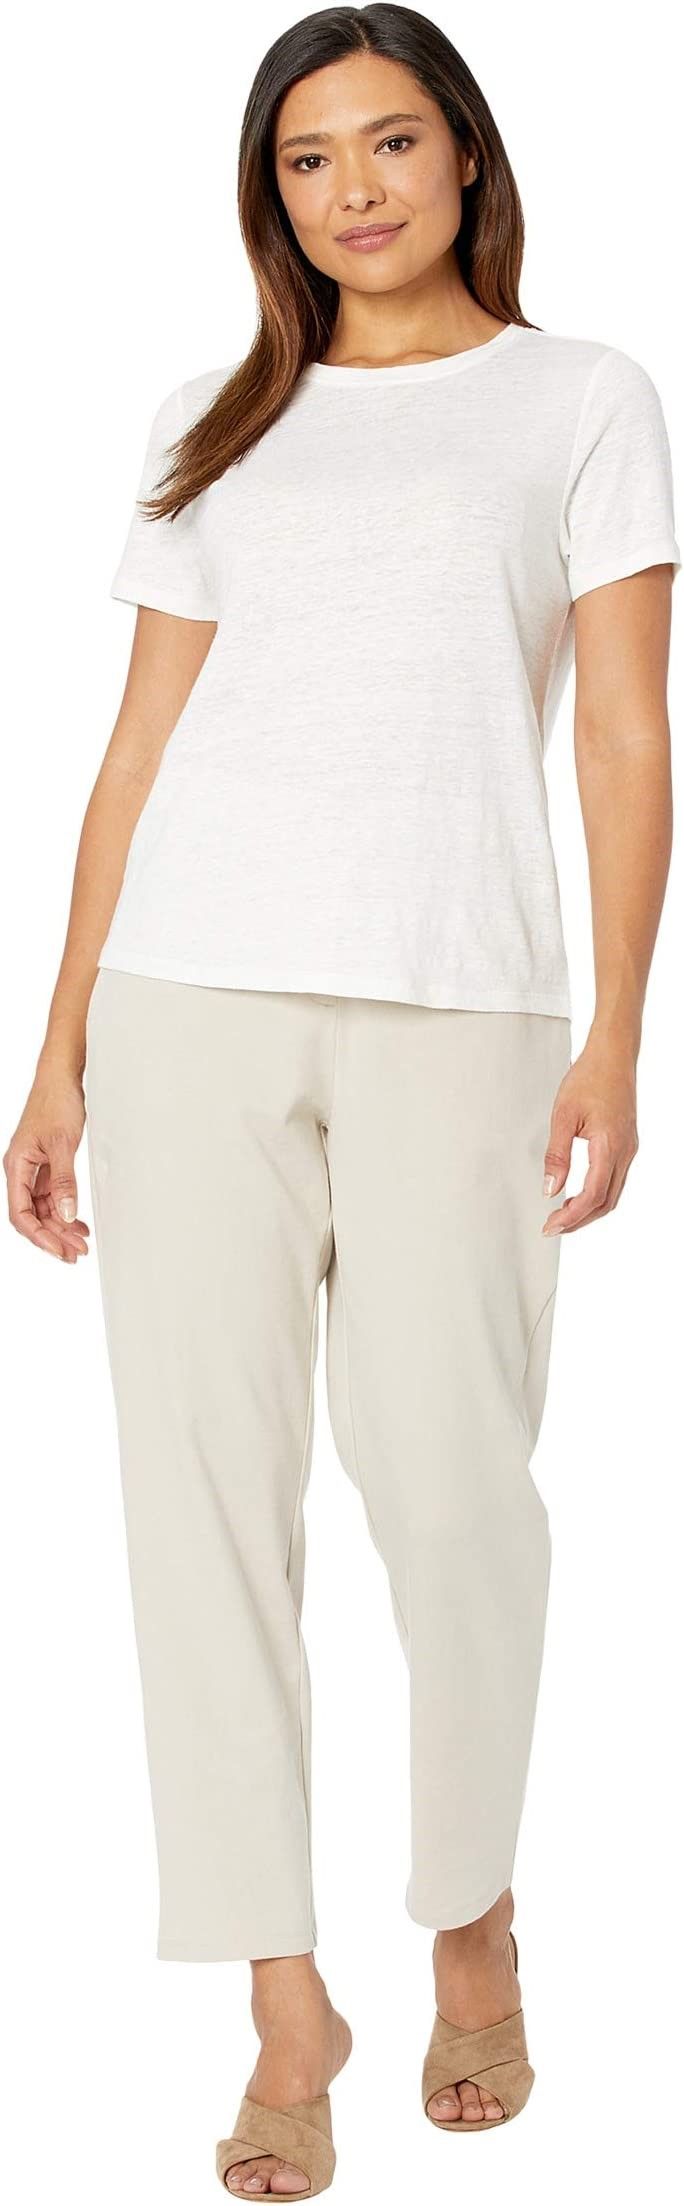  Eileen Fisher Midthigh Shorts with Drawstring in